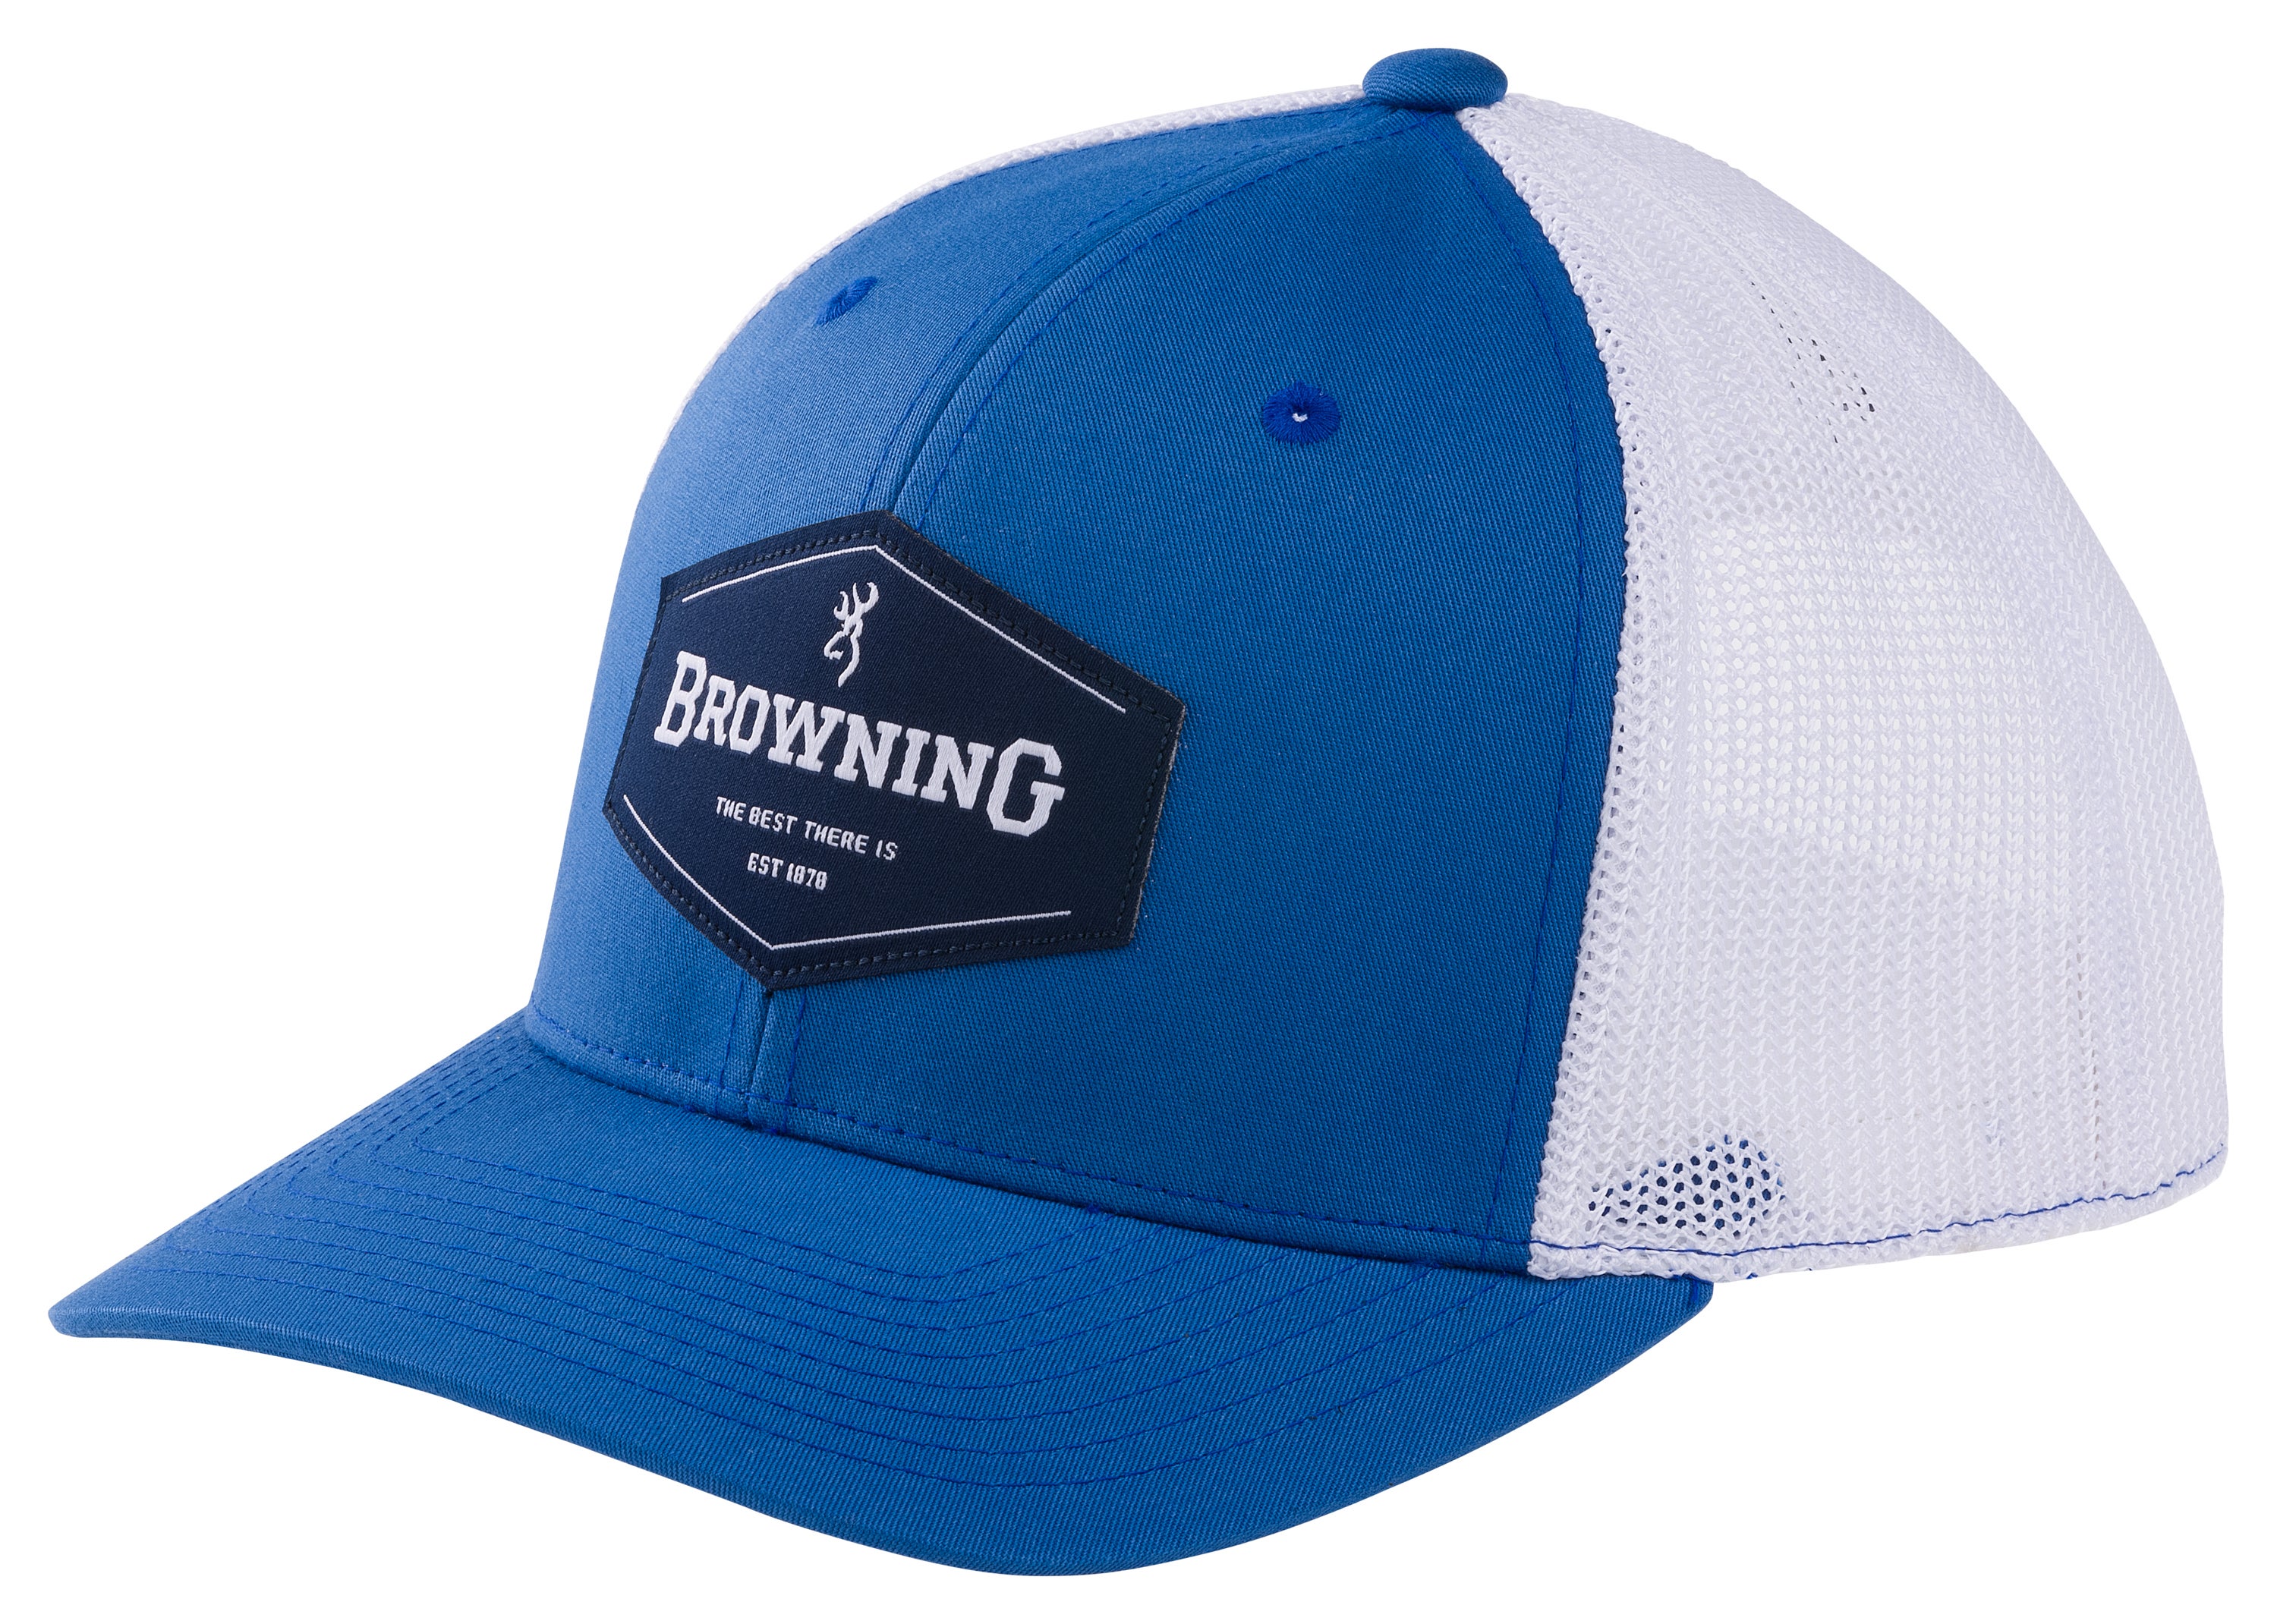 KEEP ON TRUCKING HAT WITH PATCH ADJUSTABLE SNAP SIZING COLOR NAVY BLUE 